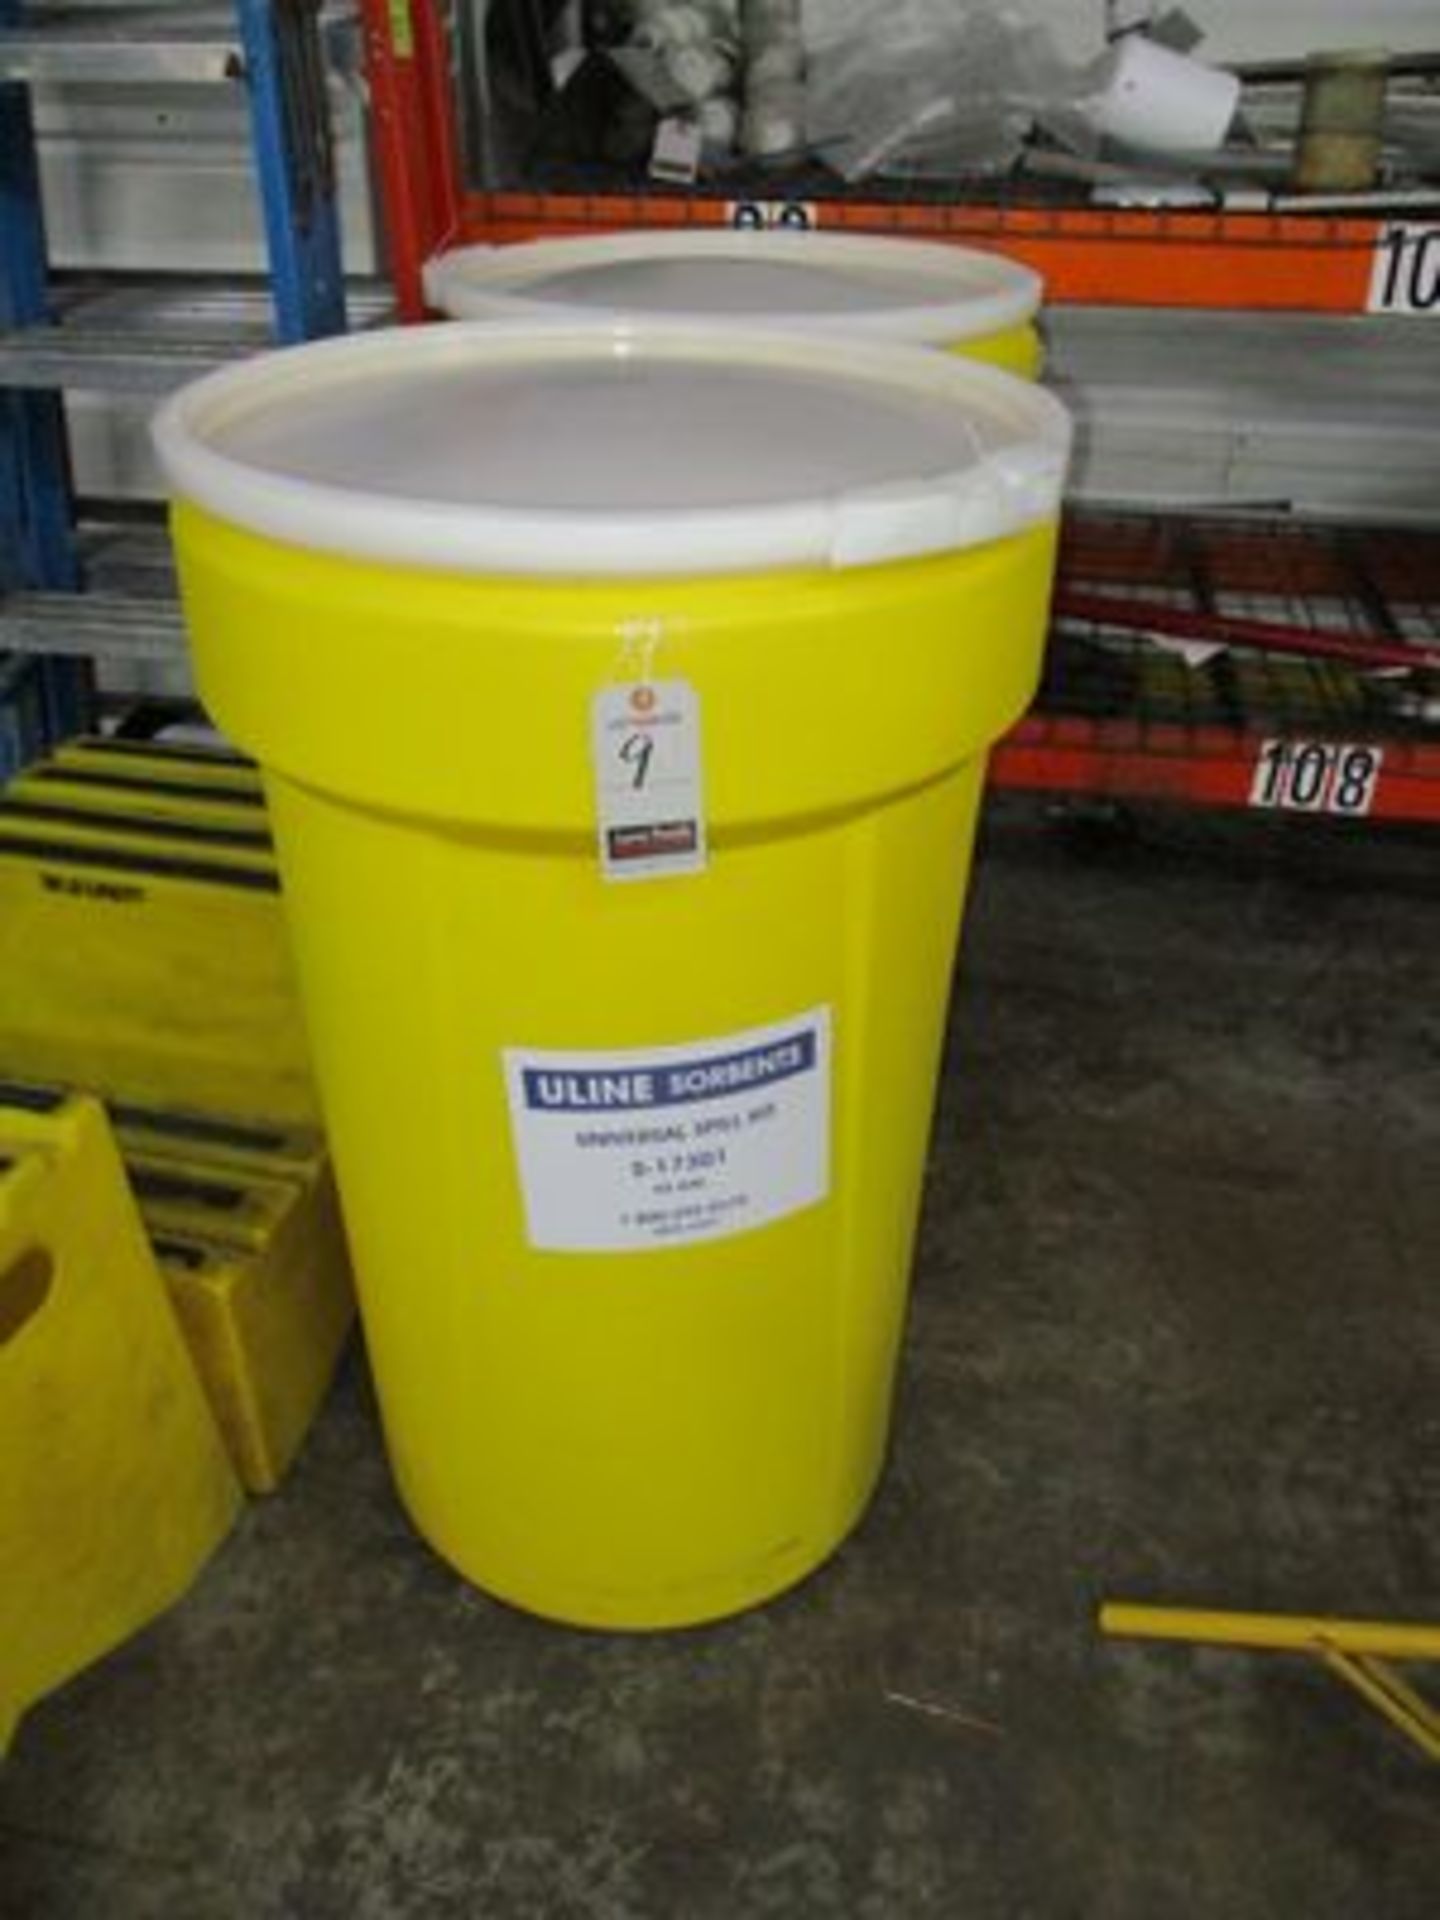 ULINE SORBENTS UNIVERSAL SPILL KIT CONTAINER, 55 GAL. CAP.